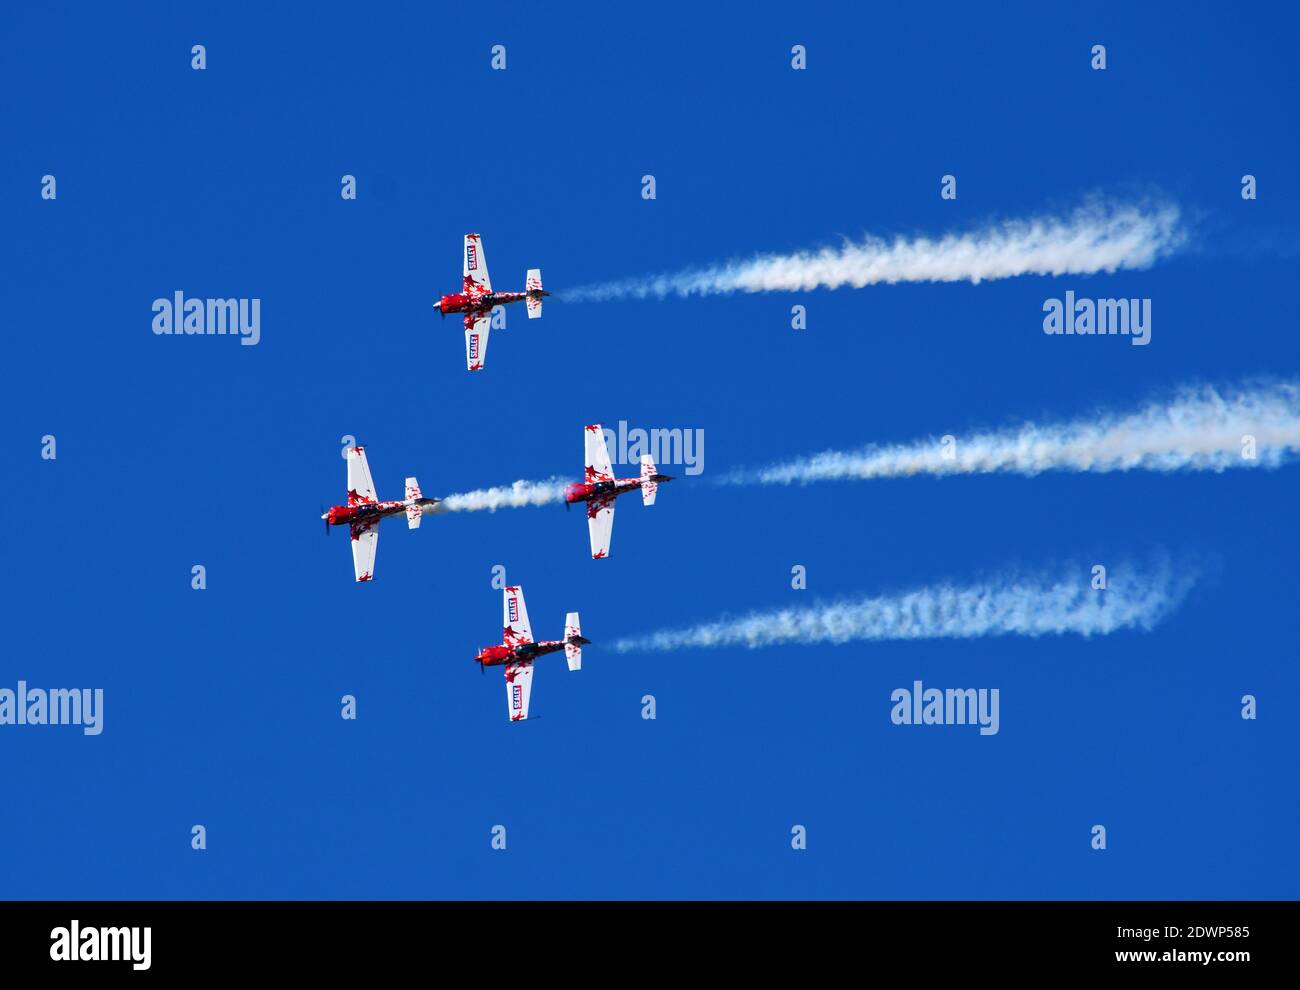 The Global Stars display team in flying in formation. Stock Photo